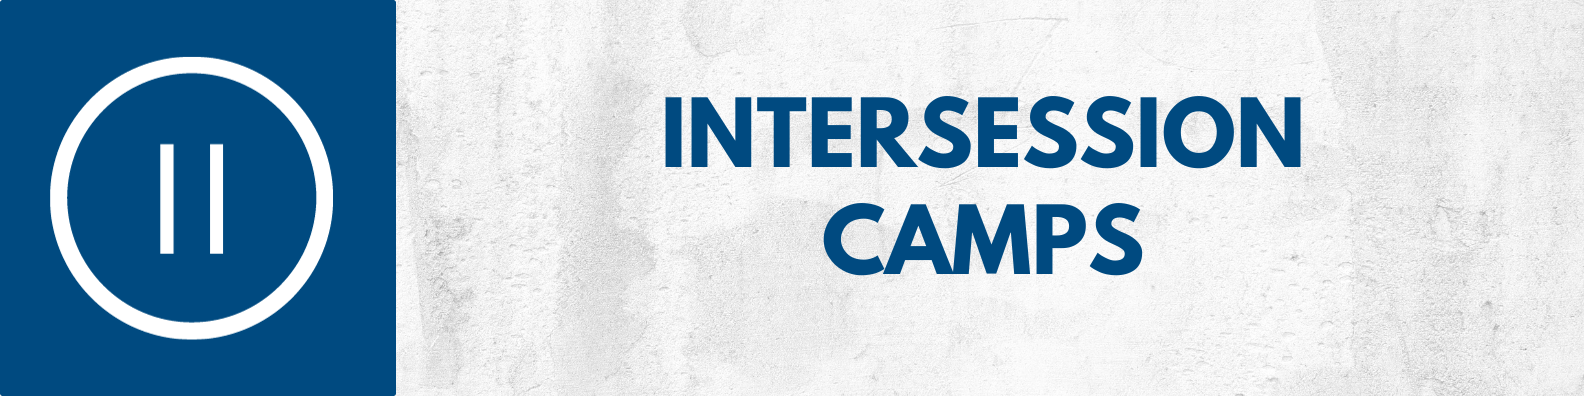 Intersession Camps Link